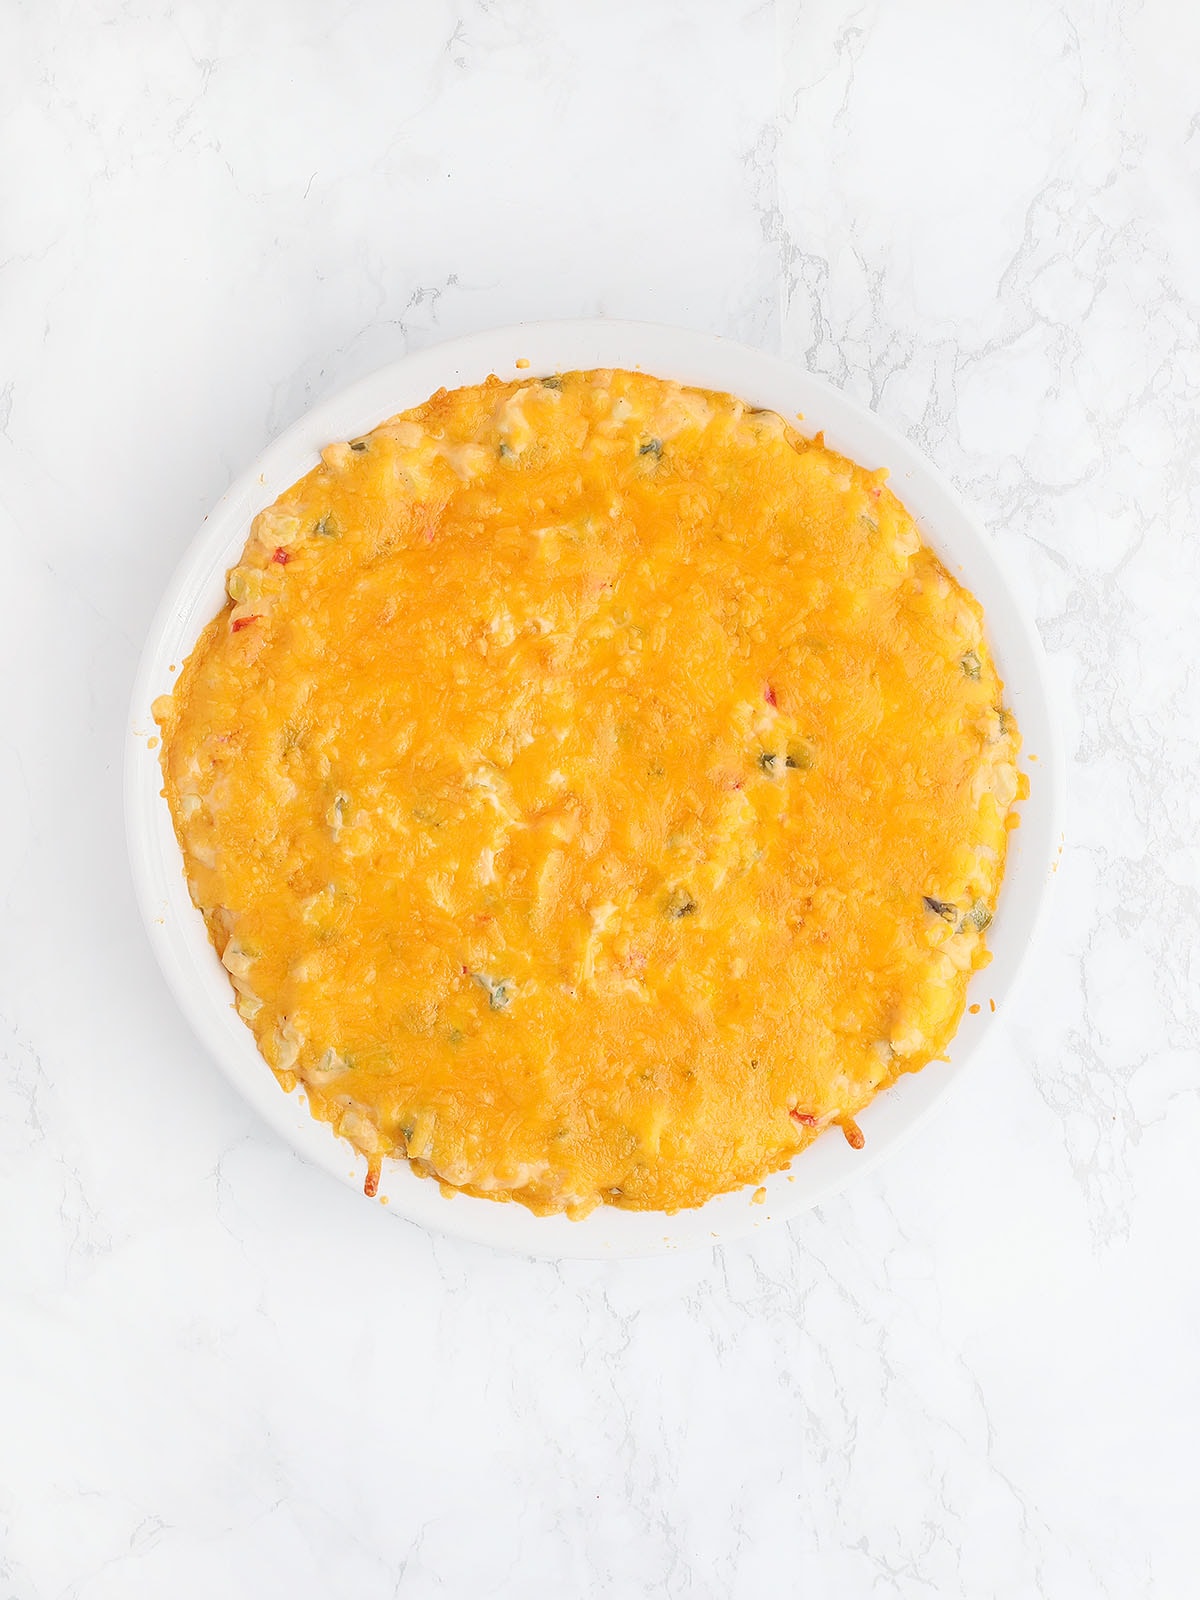 corn dip topped with melted cheese after it has been baked in the oven